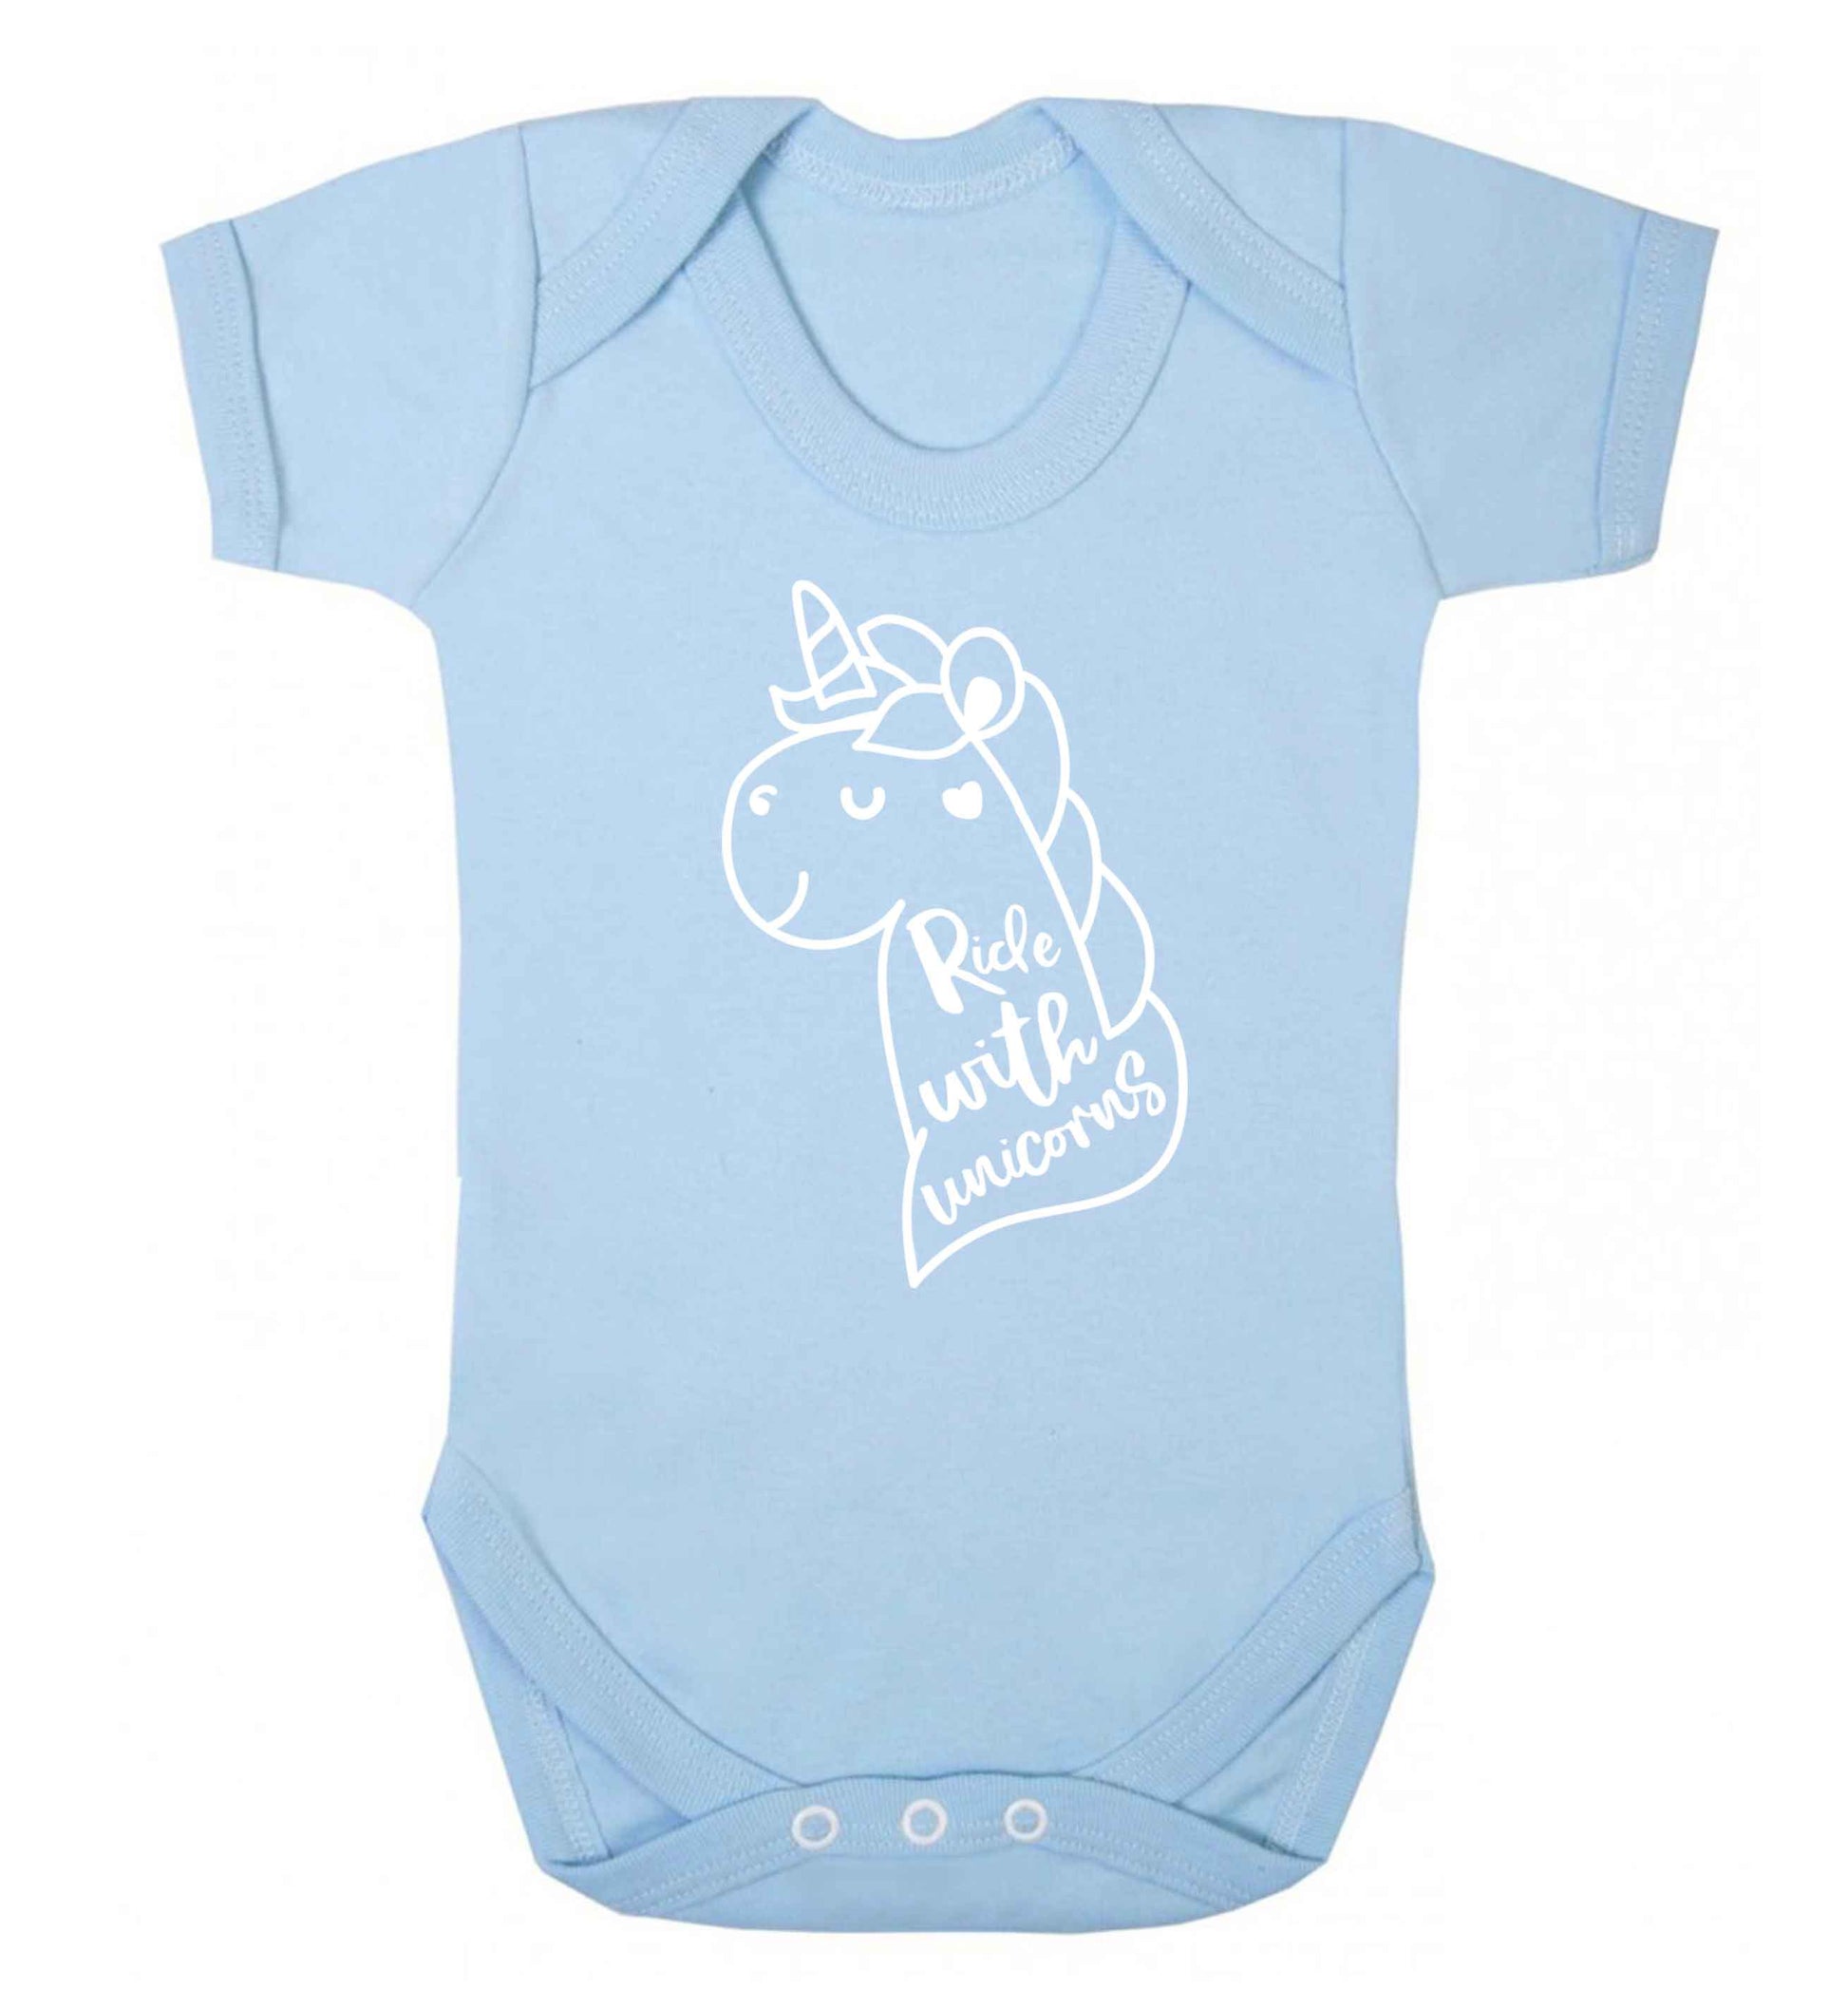 Ride with unicorns Baby Vest pale blue 18-24 months